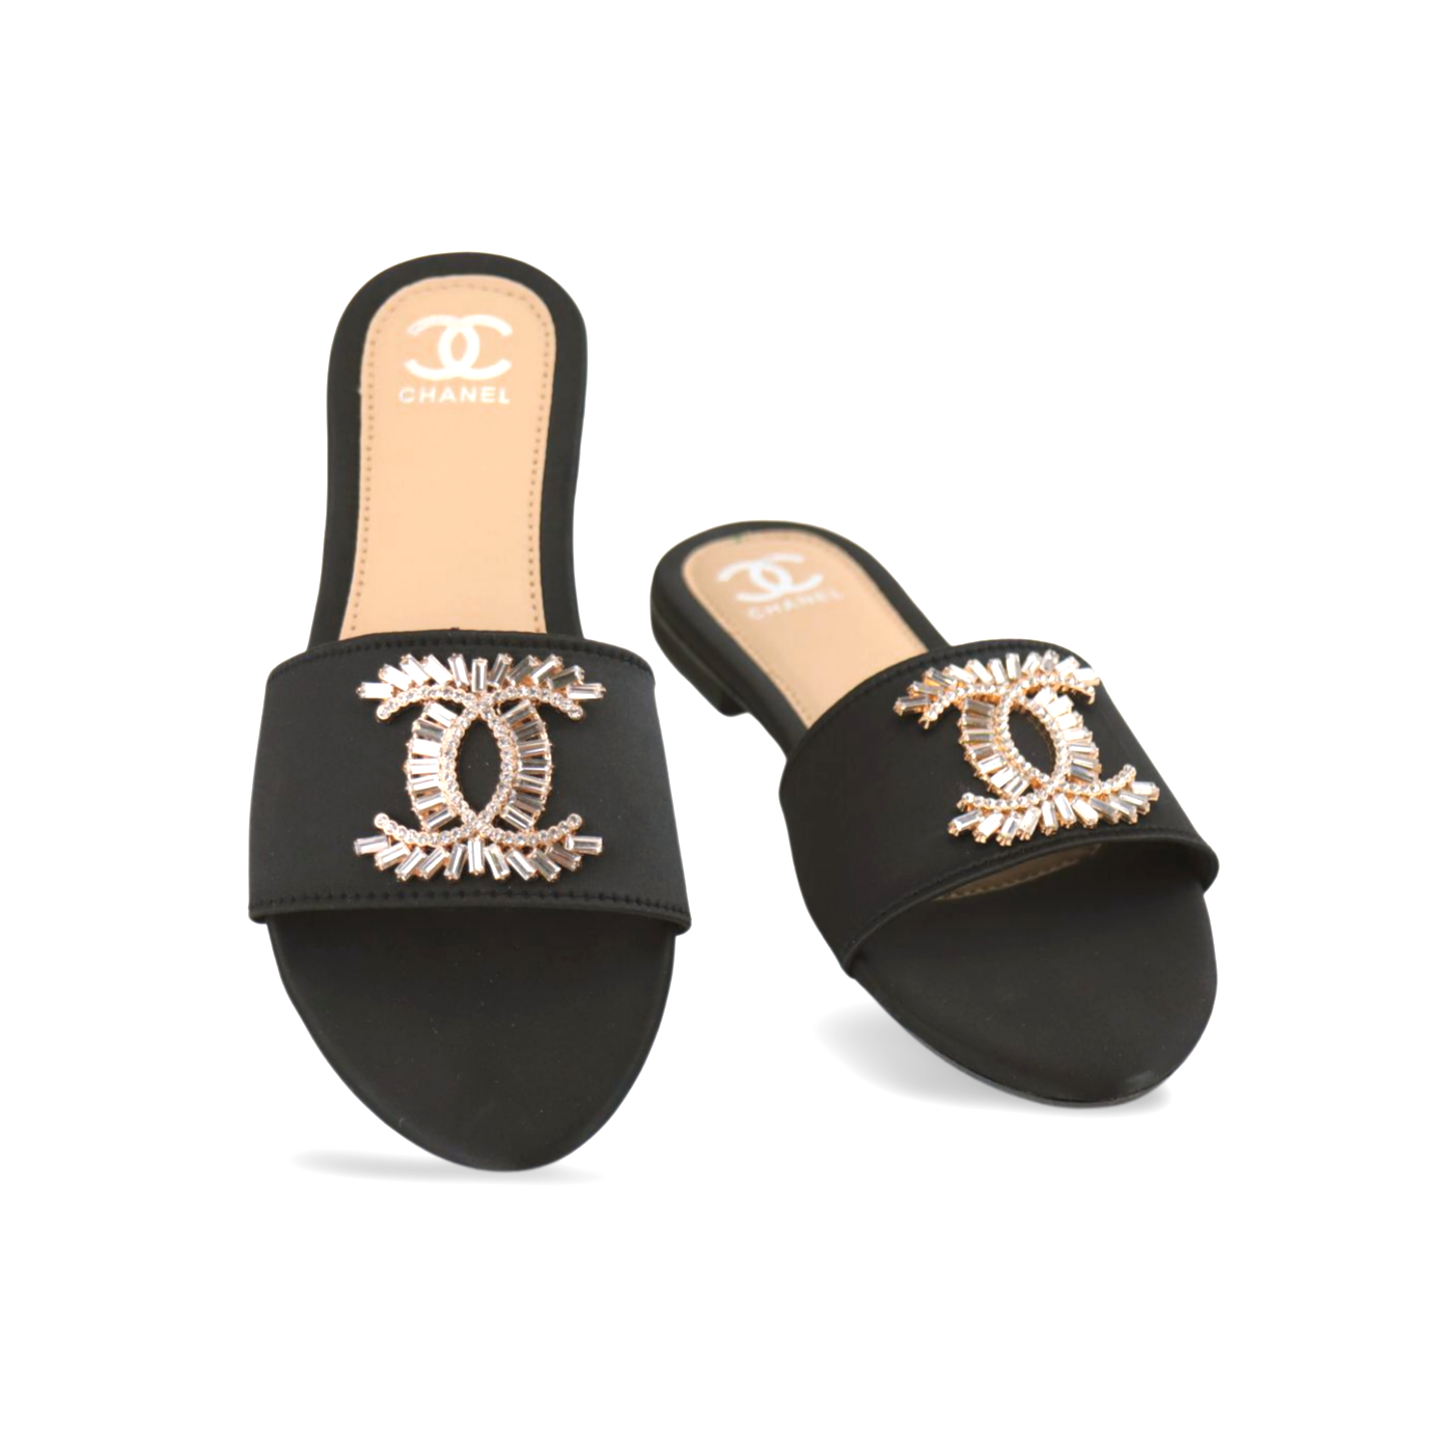 Gorgeous Flat Sandals with Rhinestone Accents - Iconic Luxury & Sparkle